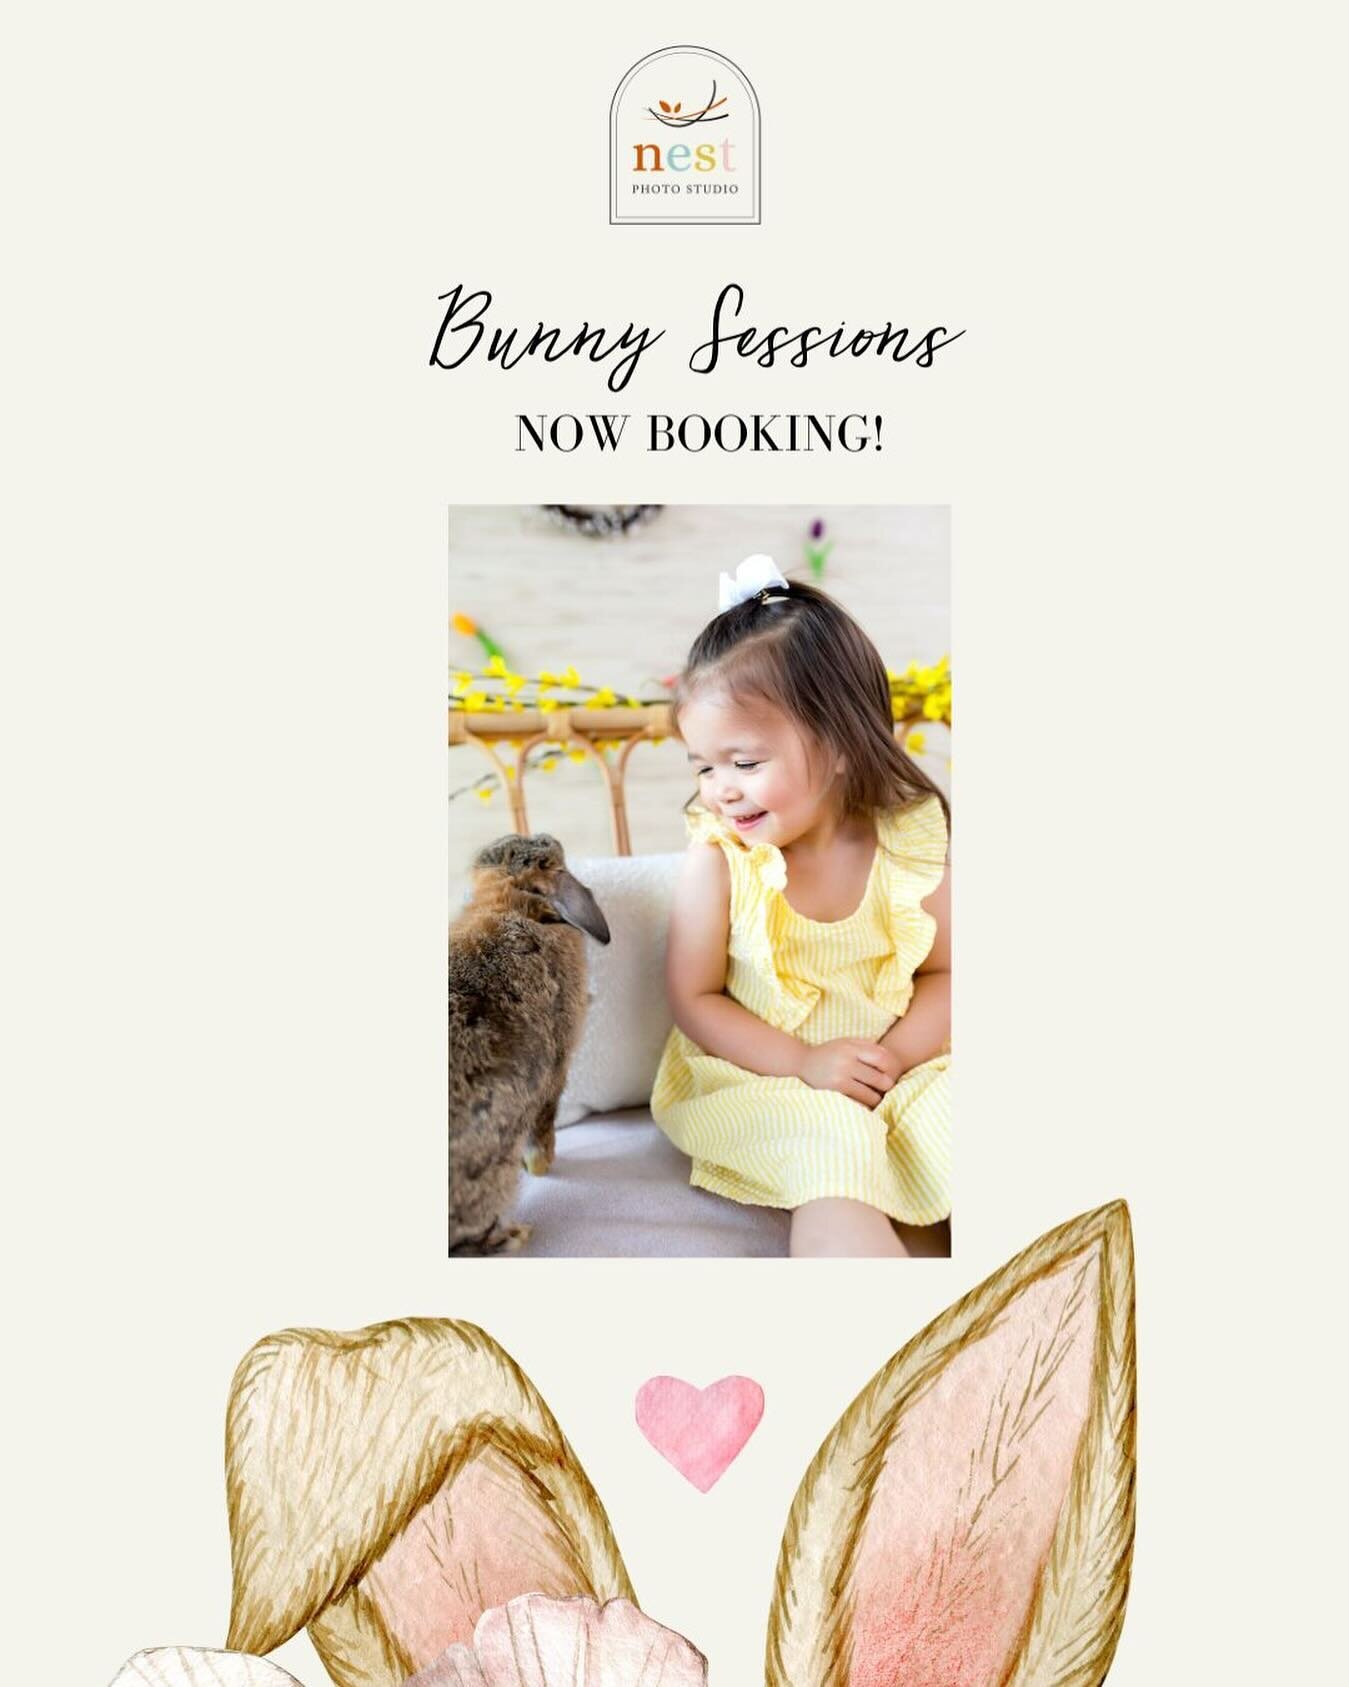 Link in bio! 

BUNNY Sessions. Meet our adorable live bunny for some gentle petting and the sweetest photos. 

🐰